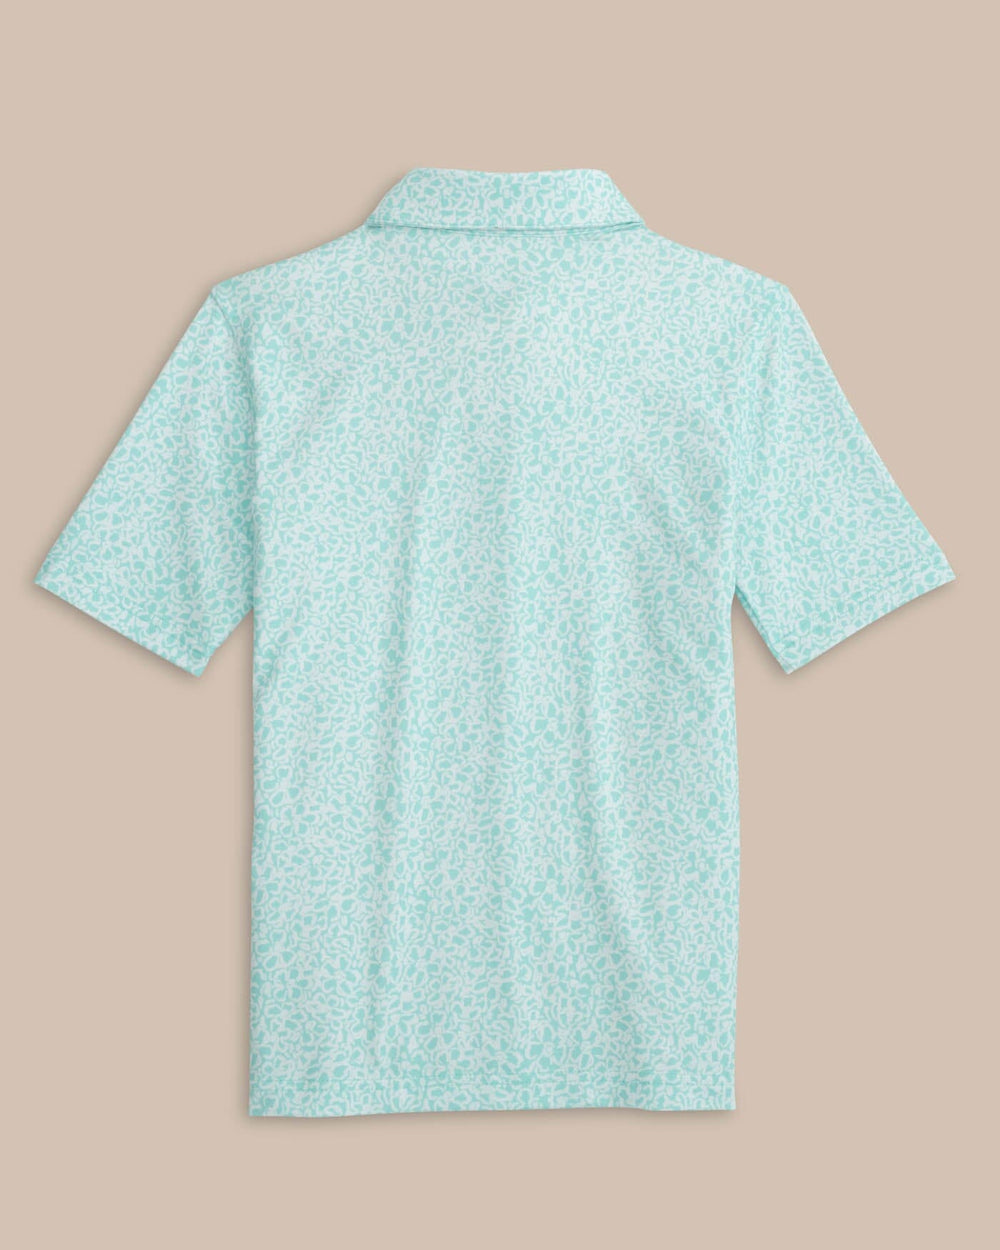 The back view of the Southern Tide Kids Driver That Floral Feeling Printed Polo by Southern Tide - Wake Blue